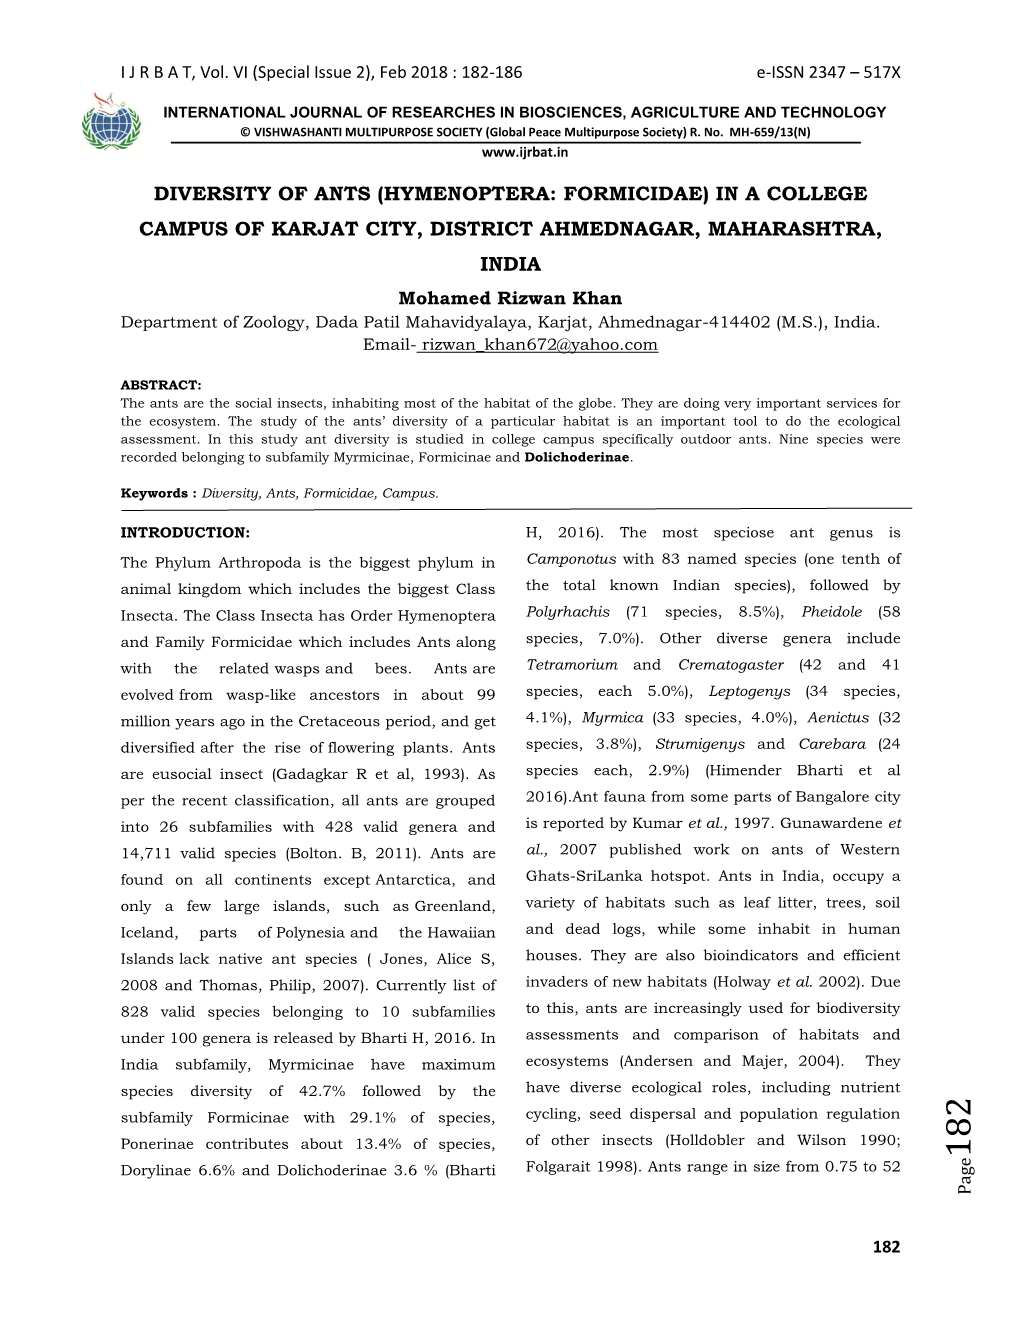 Diversity of Ants (Hymenoptera: Formicidae) in a College Campus Of